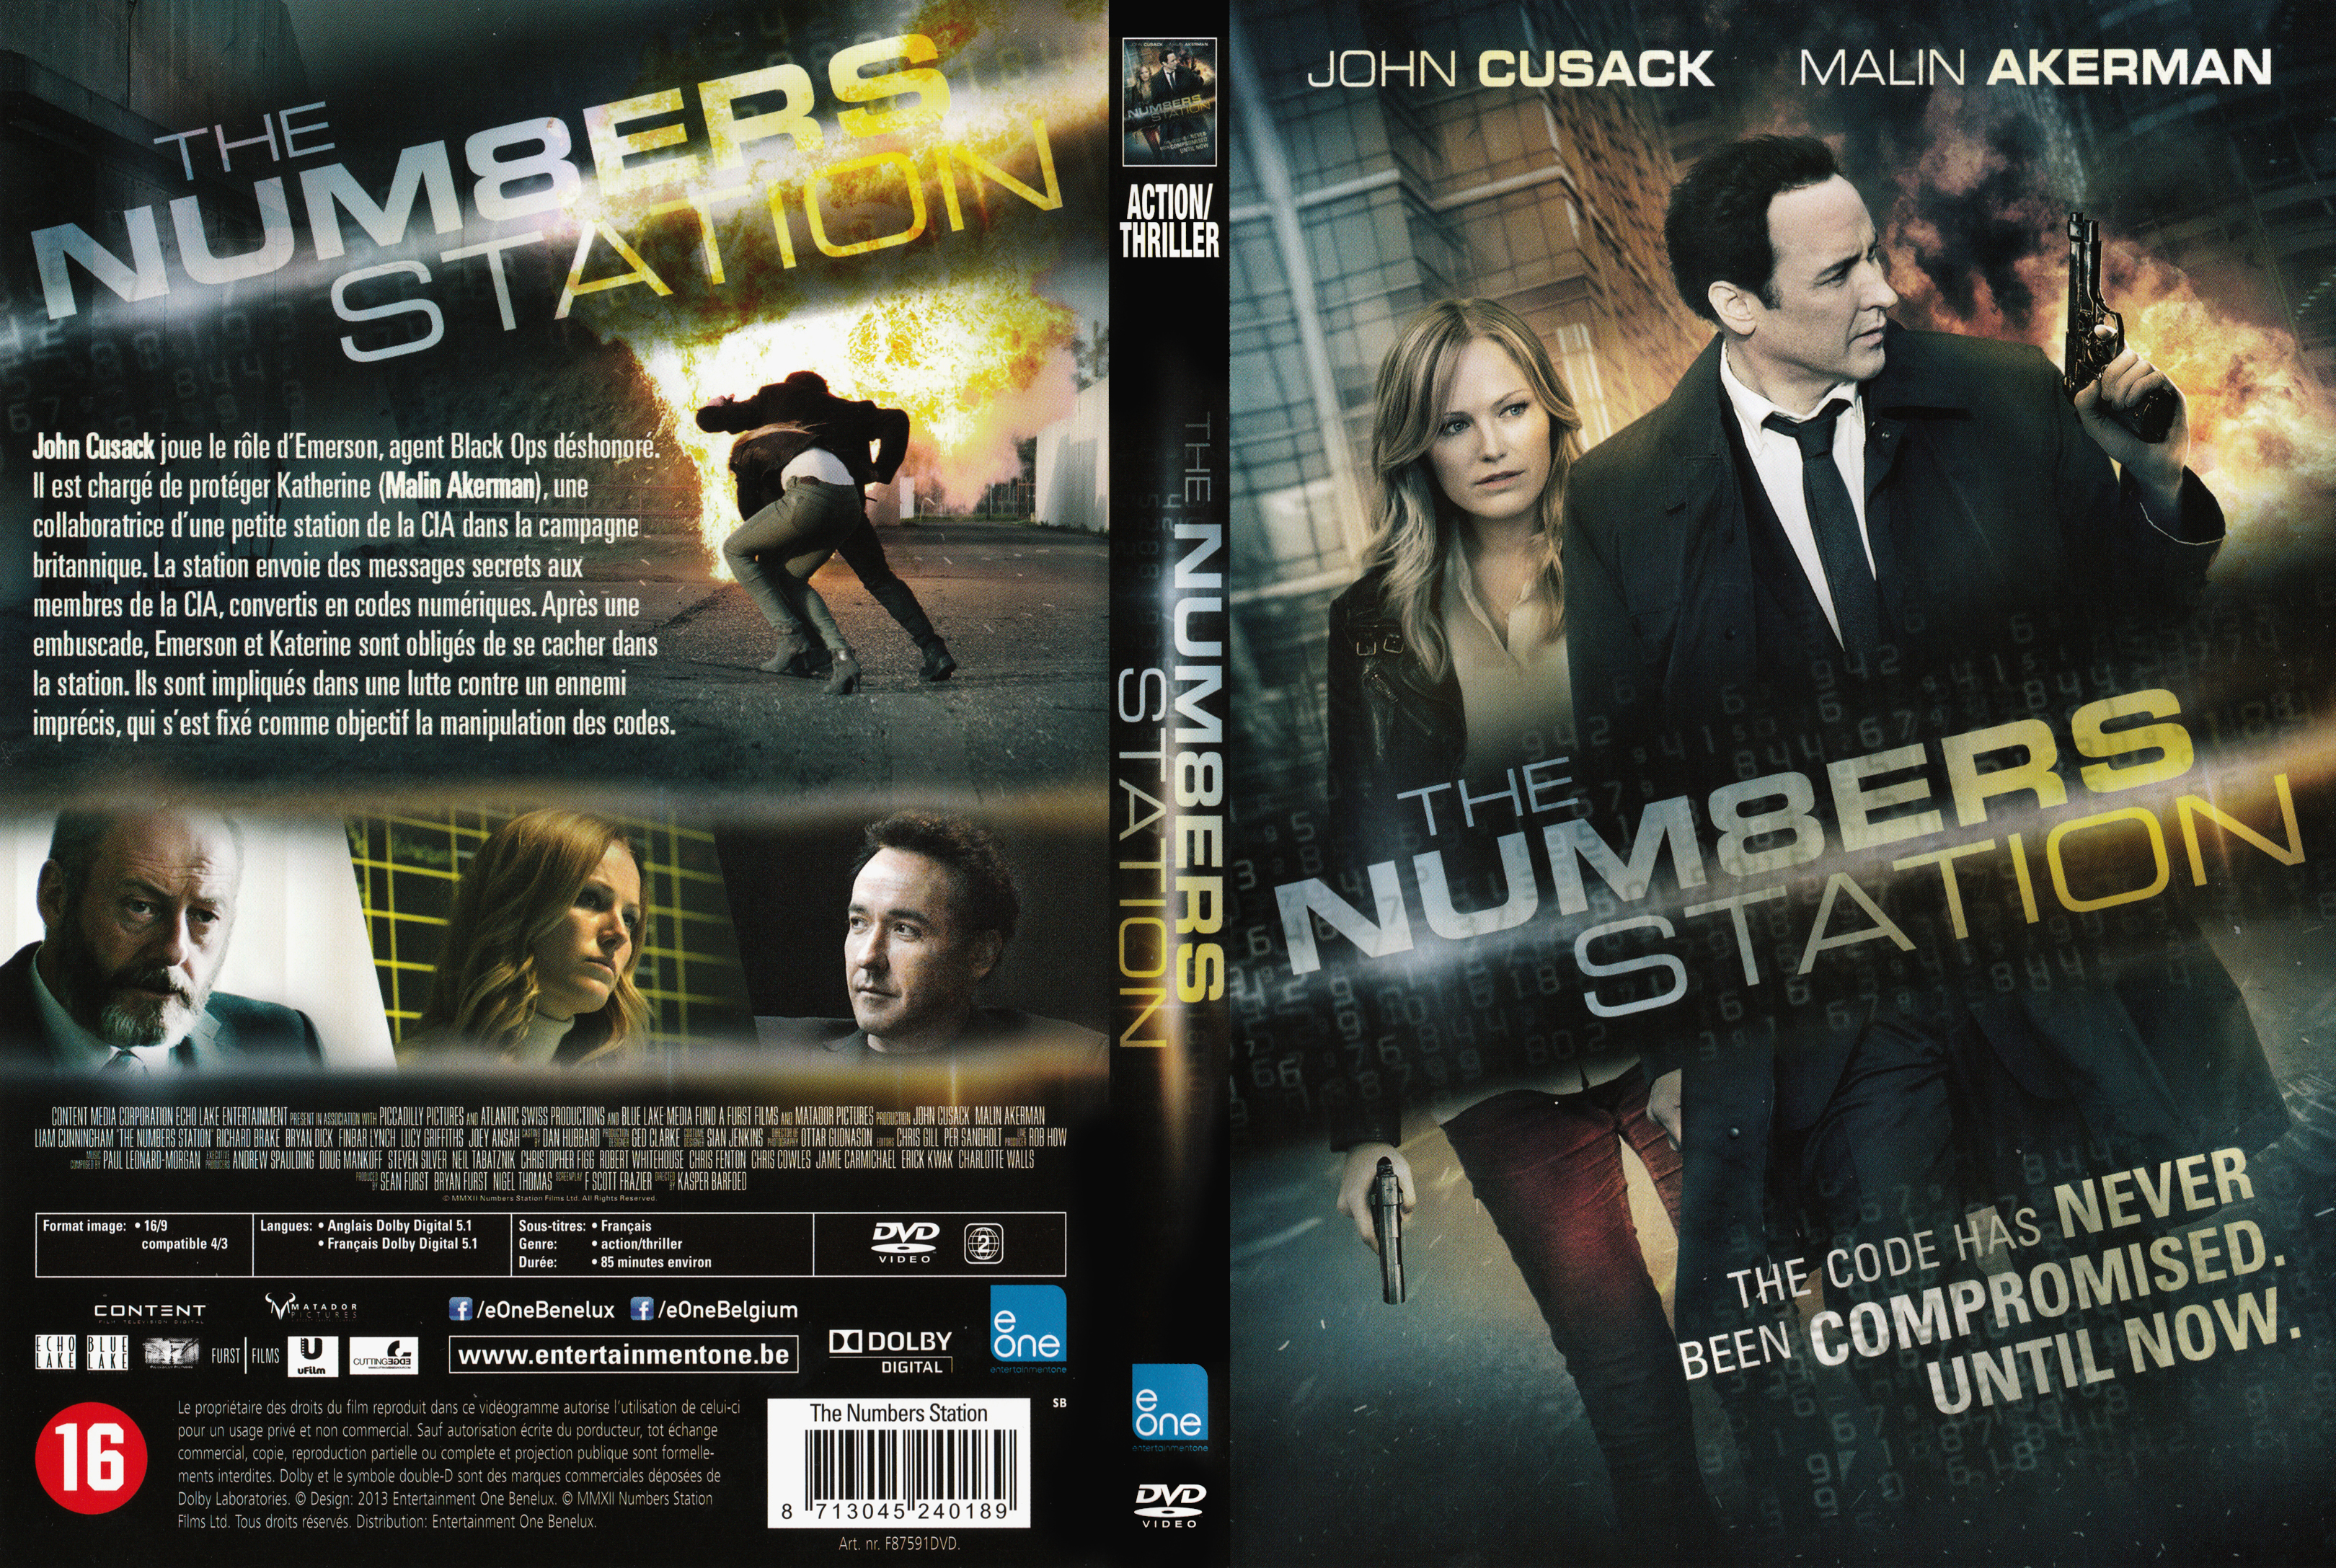 Jaquette DVD The number station